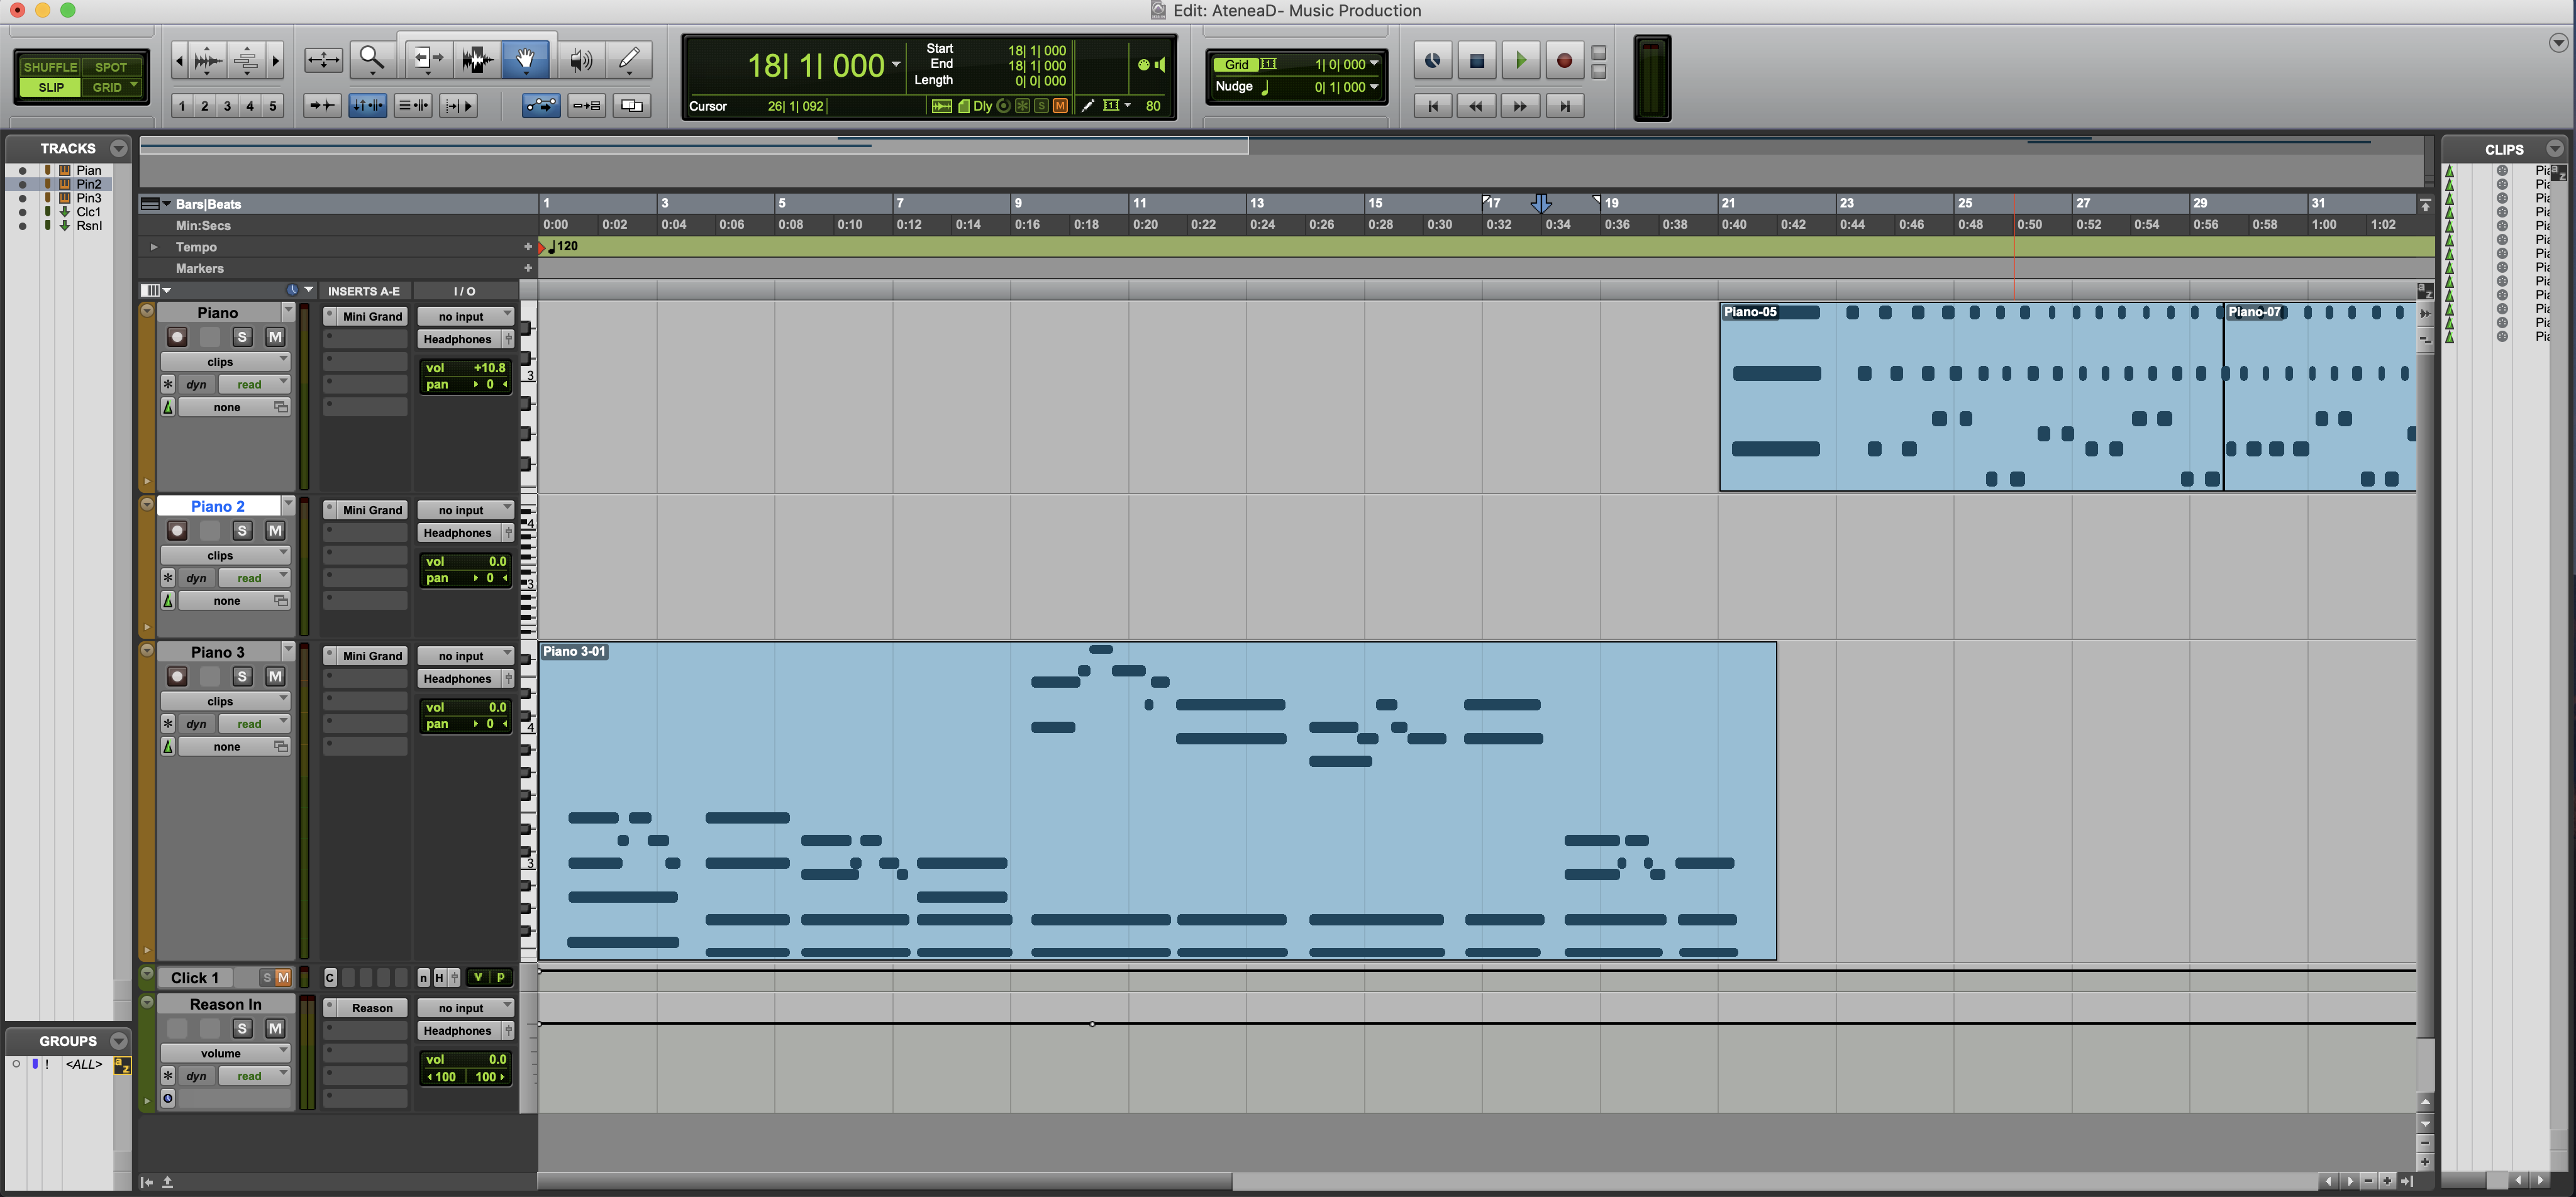 Screenshot of the Pro Tools interface